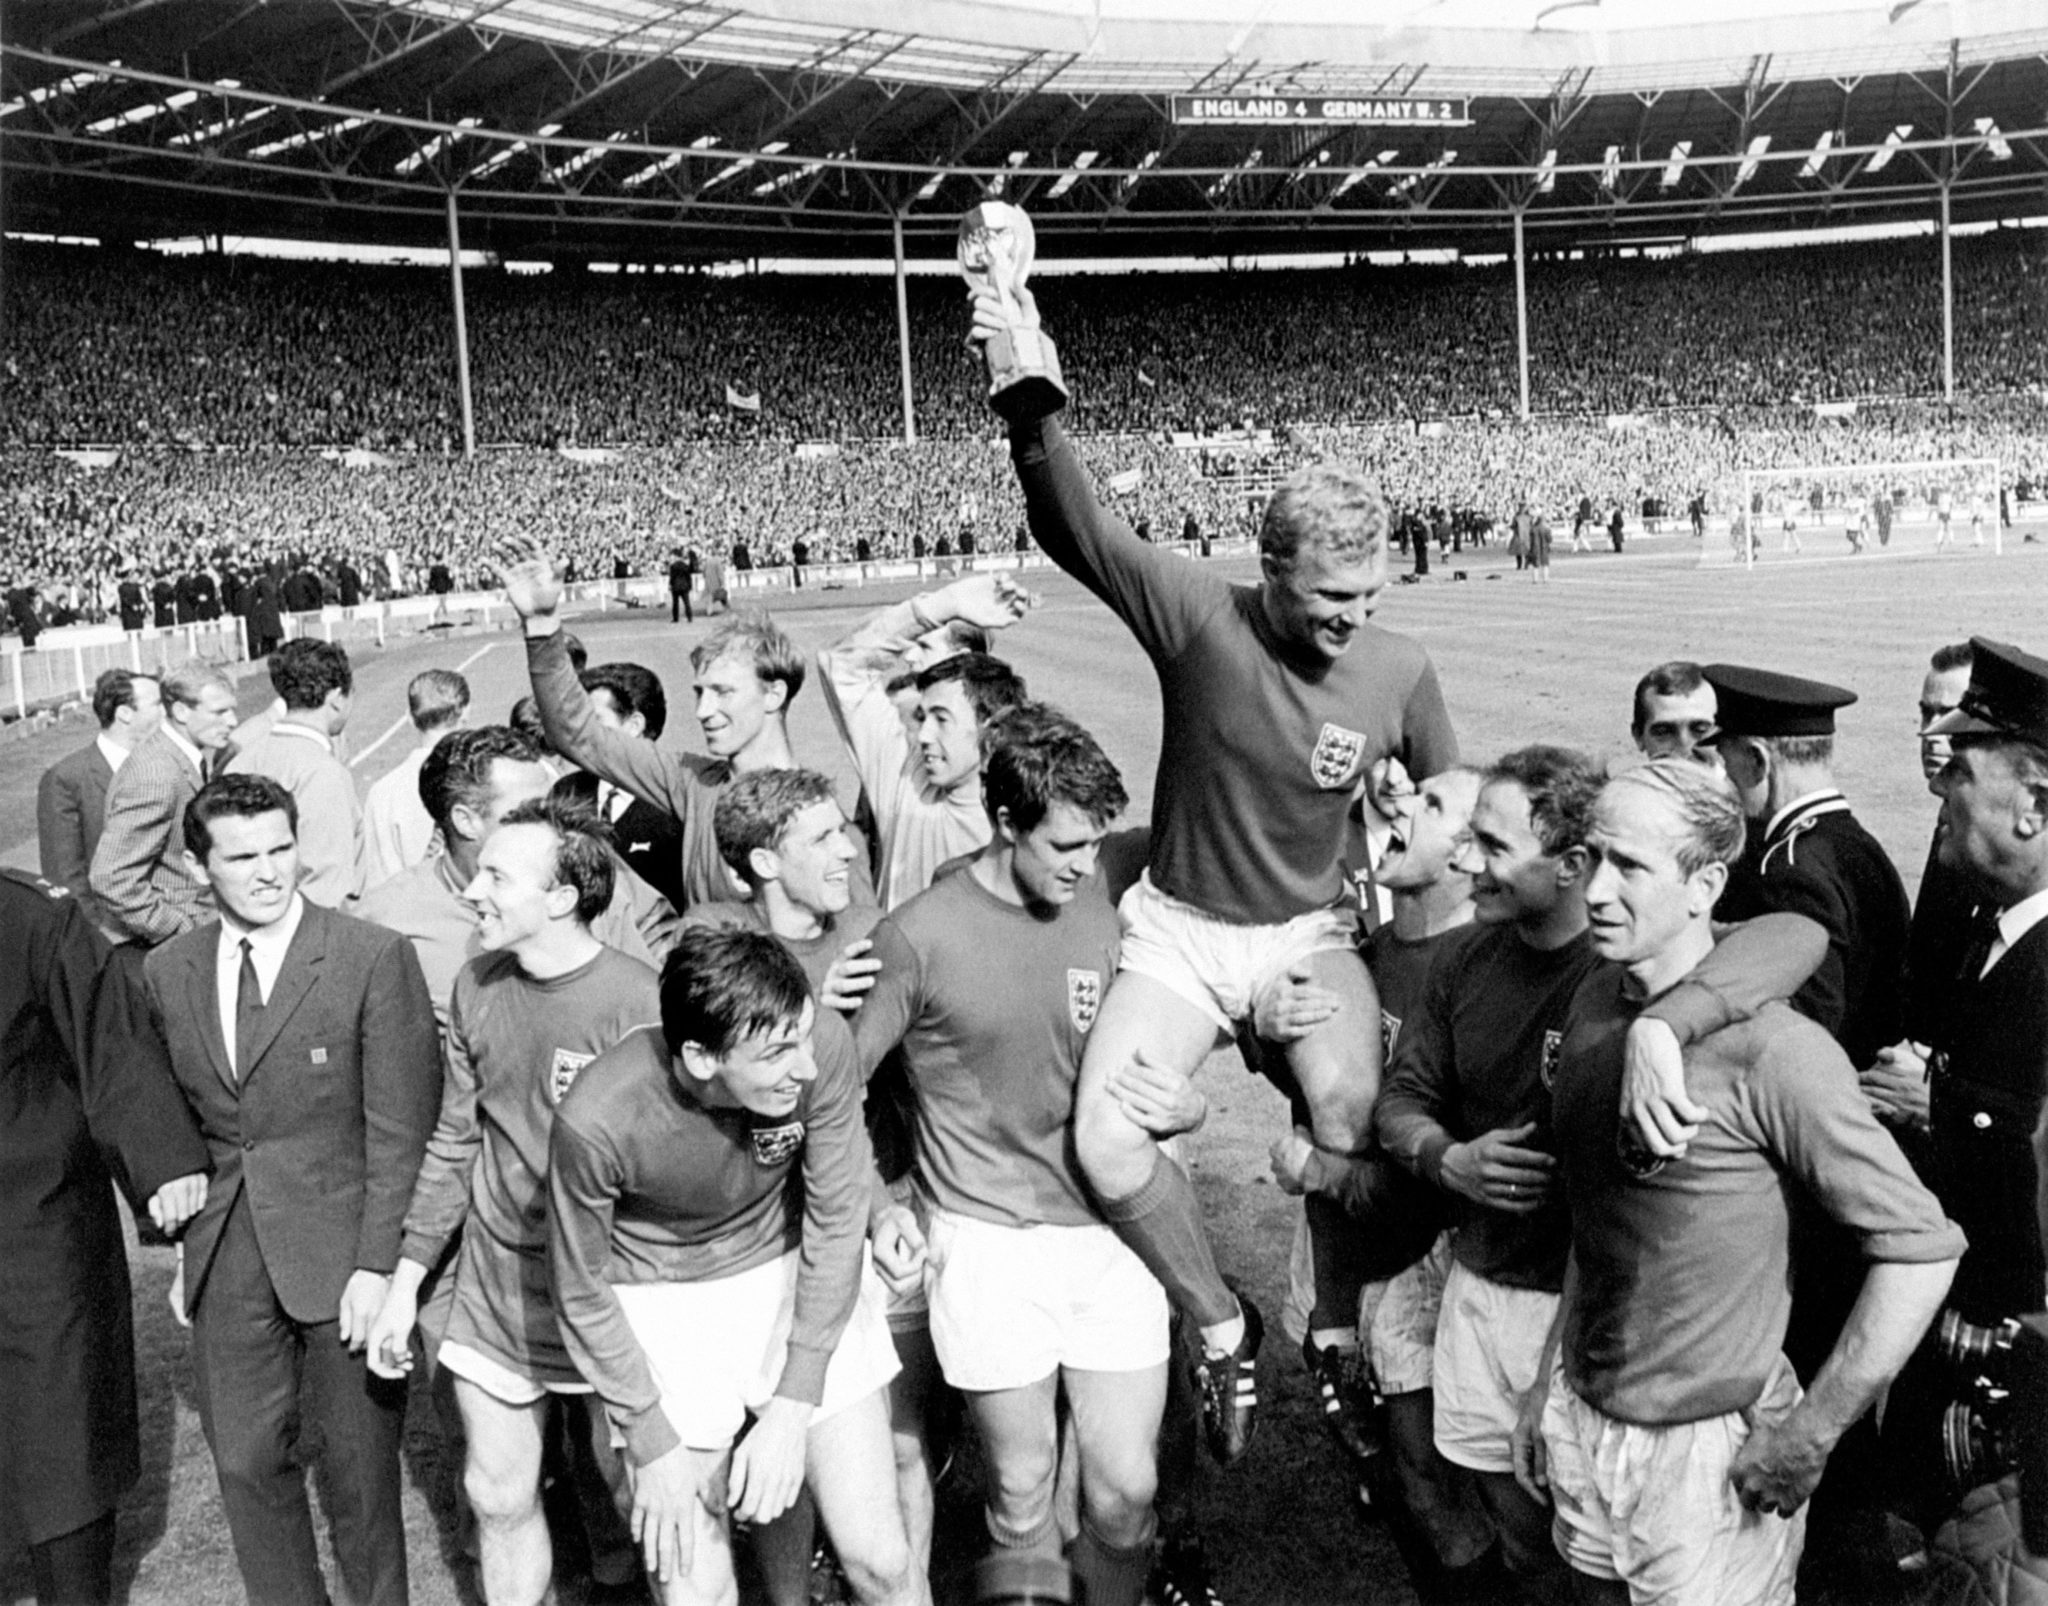 England captain Bobby Moore holds the World Cup aloft as he is chaired by his jubilant teammates: (l-r) Nobby Stiles, Martin Peters (front), Jack Charlton (back), Alan Ball, Gordon Banks, Geoff Hurst, Roger Hunt (hidden behind Hurst), Bobby Moore, Ray Wilson, George Cohen, Bobby Charlton. Other members of the England squad in the picture are Jimmy Greaves (background, far l), Ron Flowers (background, second l), Terry Paine (l of Stiles), Gerry Byrne (behind Bobby Charlton's head)